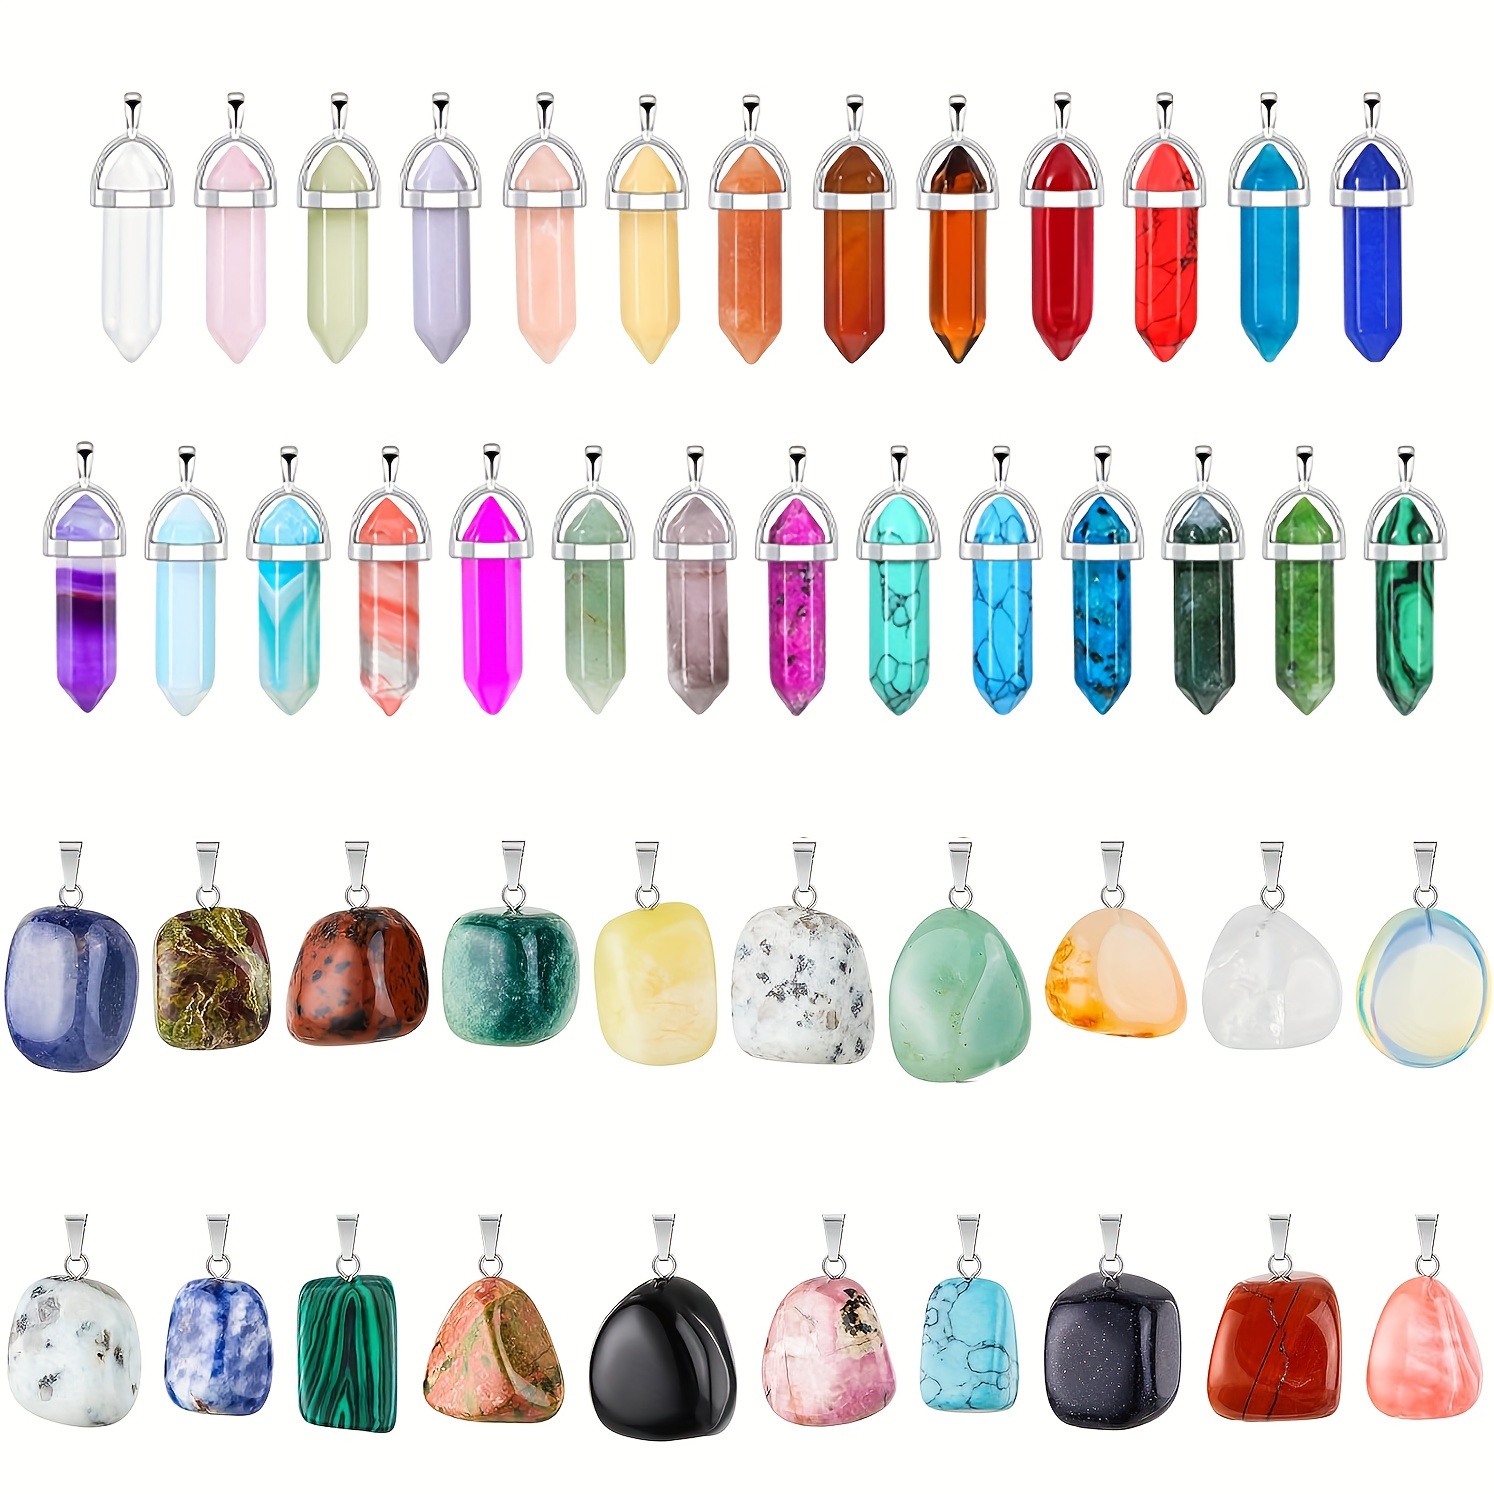 

30pcs Mixed Loading Crystal Pendants Hexagonal Bullet Shaped Stone Pendants Charms Irregular Stone Beads For Diy Bracelets Necklaces Earrings Jewelry Making